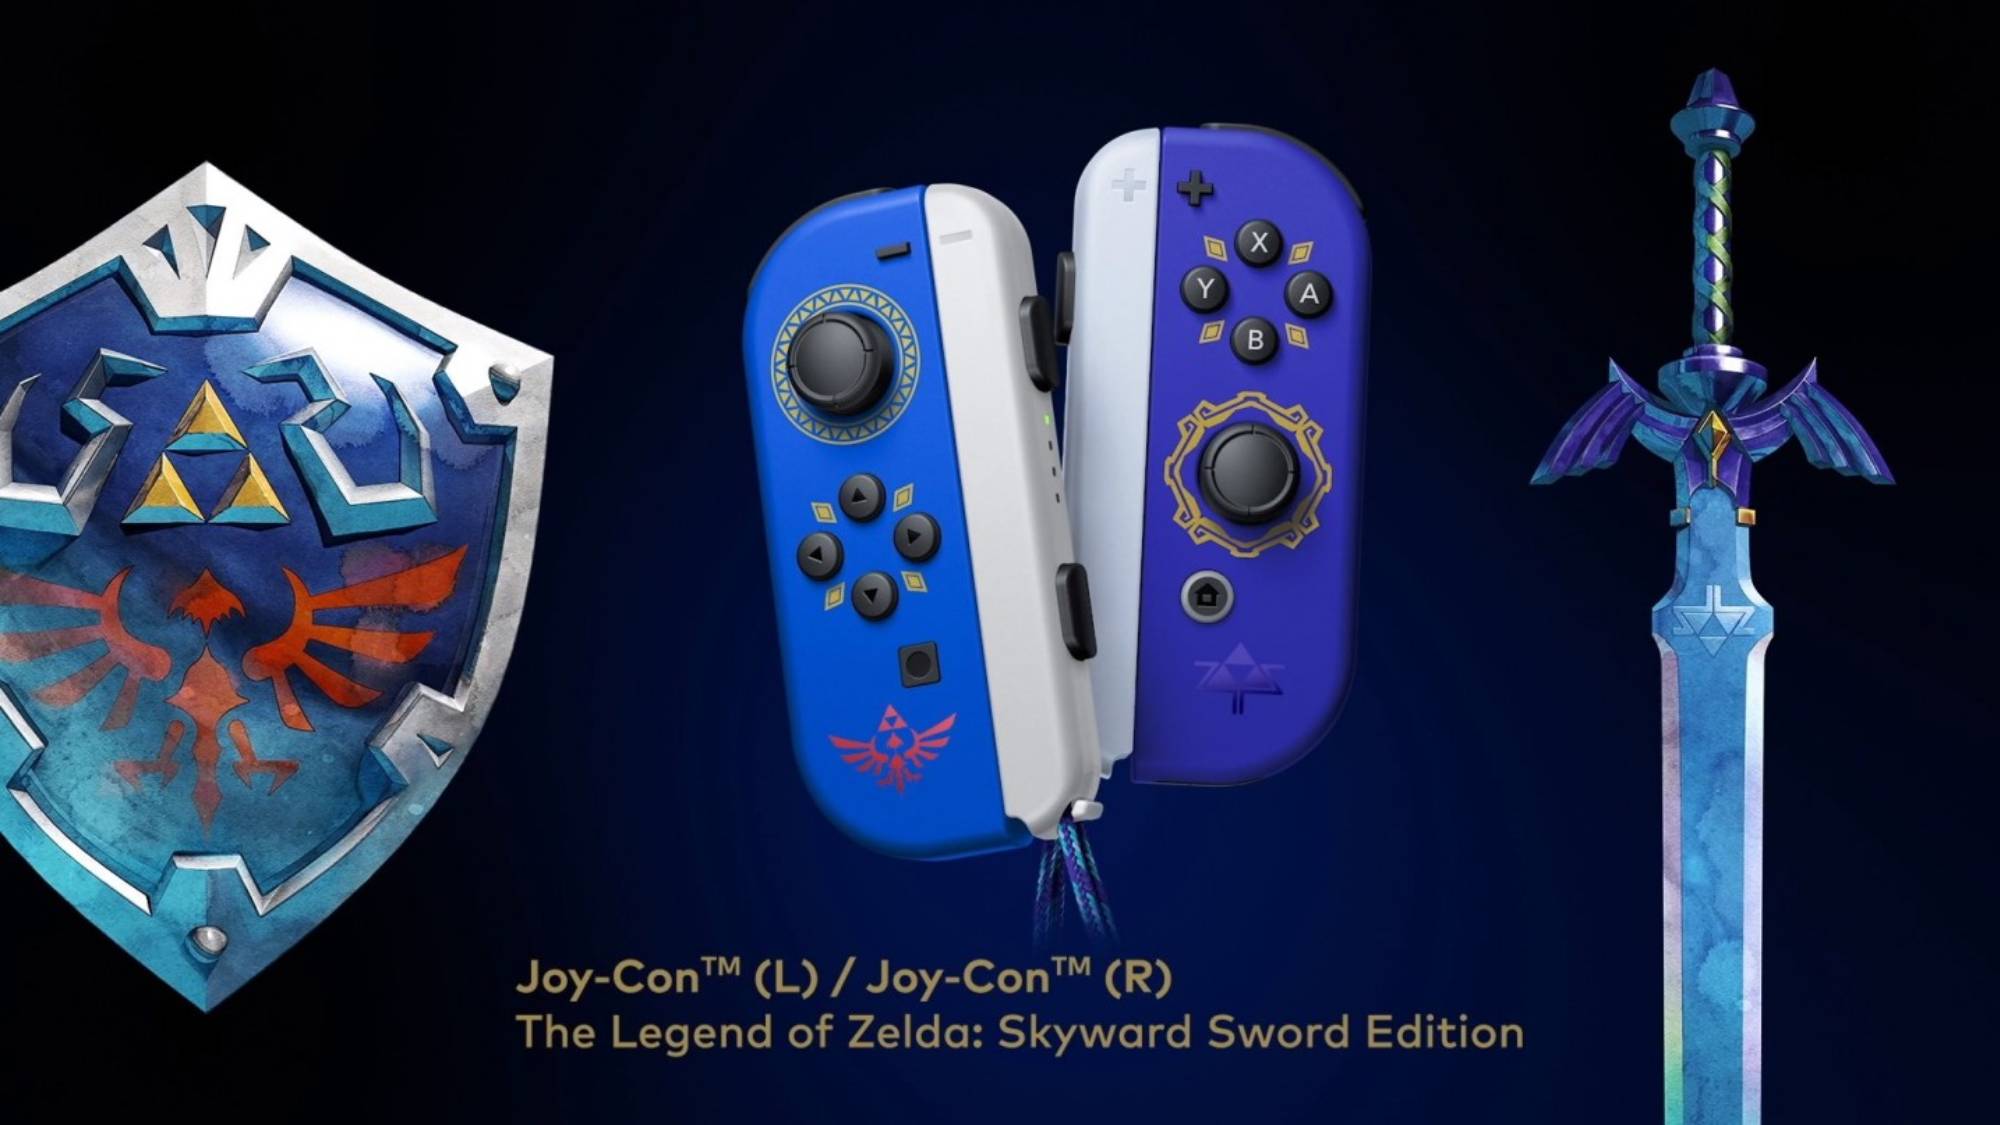 Deform Settlers hue Where to buy limited edition Zelda Joy-Cons | Tom's Guide